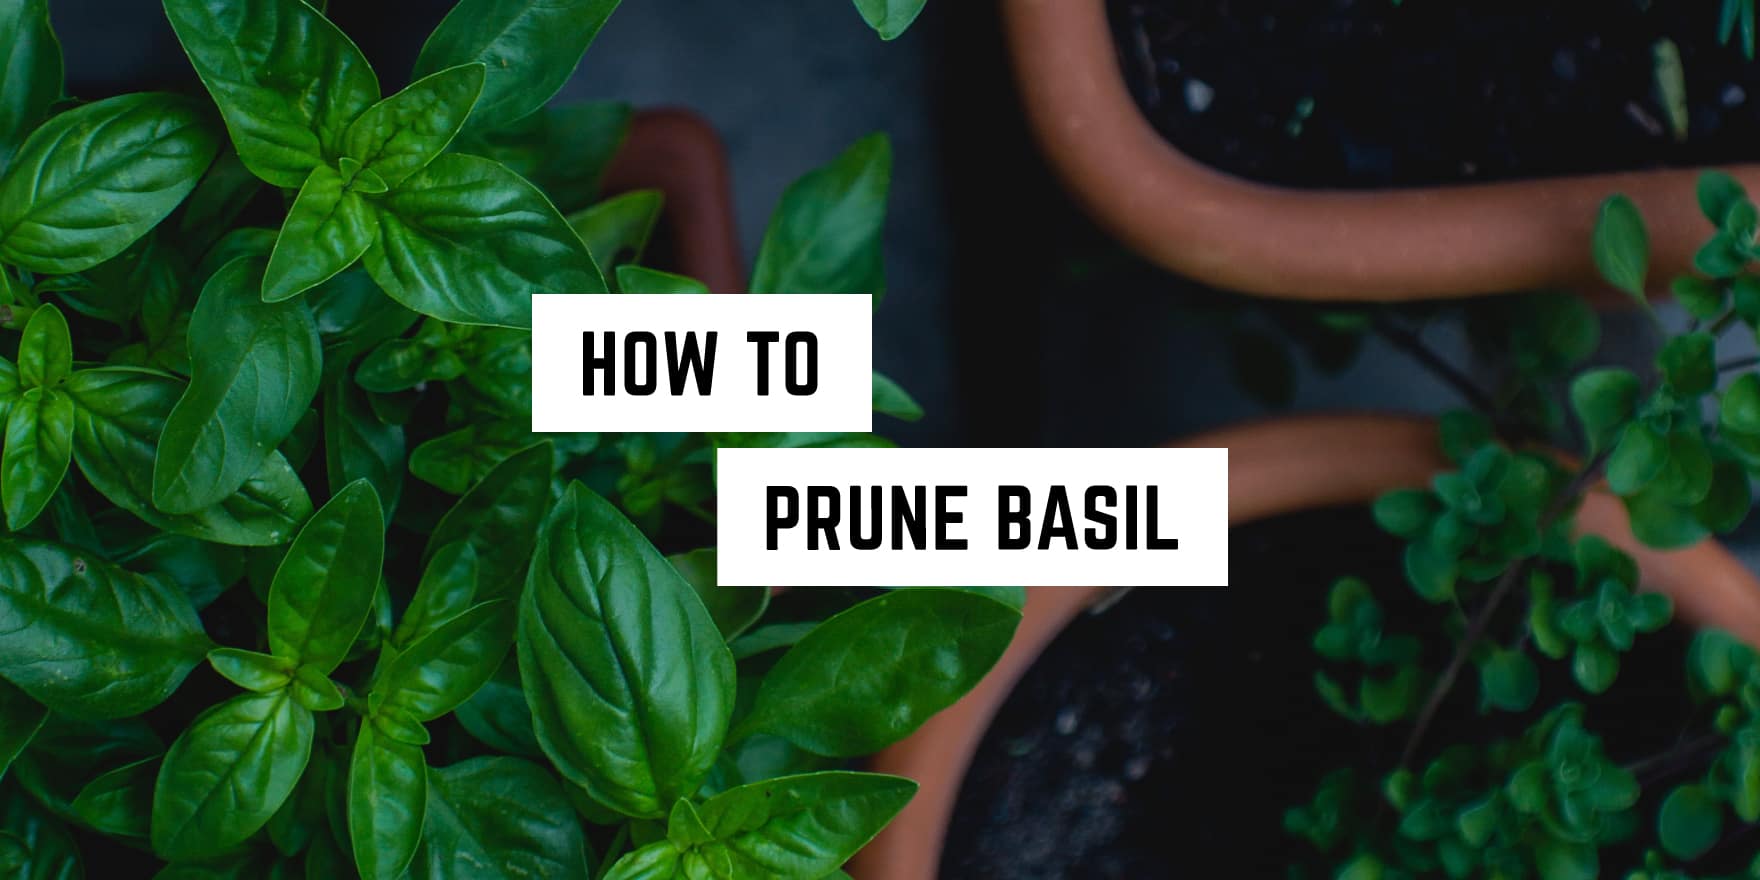 Lush green basil plants with a caption overlay: "How to prune basil for your witchy garden needs.